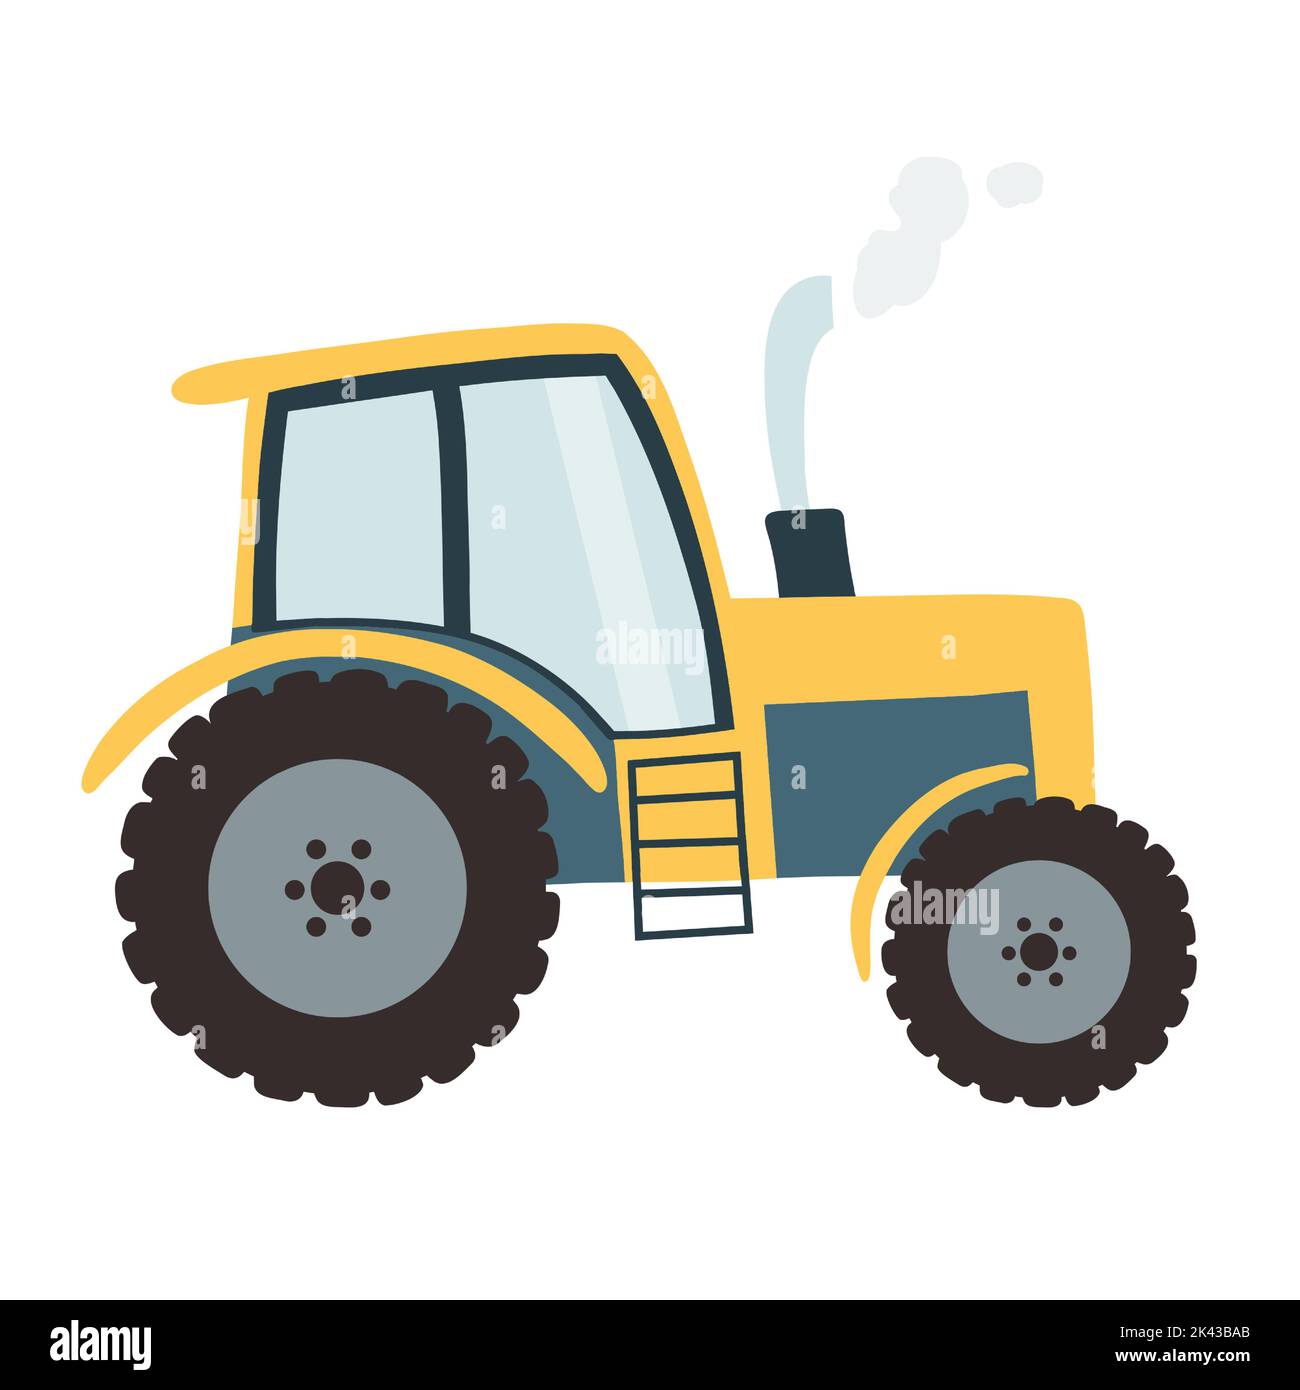 Tractor in cartoon flat style. Vector illustration of a heavy agricultural machinery for plowing, cultivating the soil and planting fields. Stock Vector